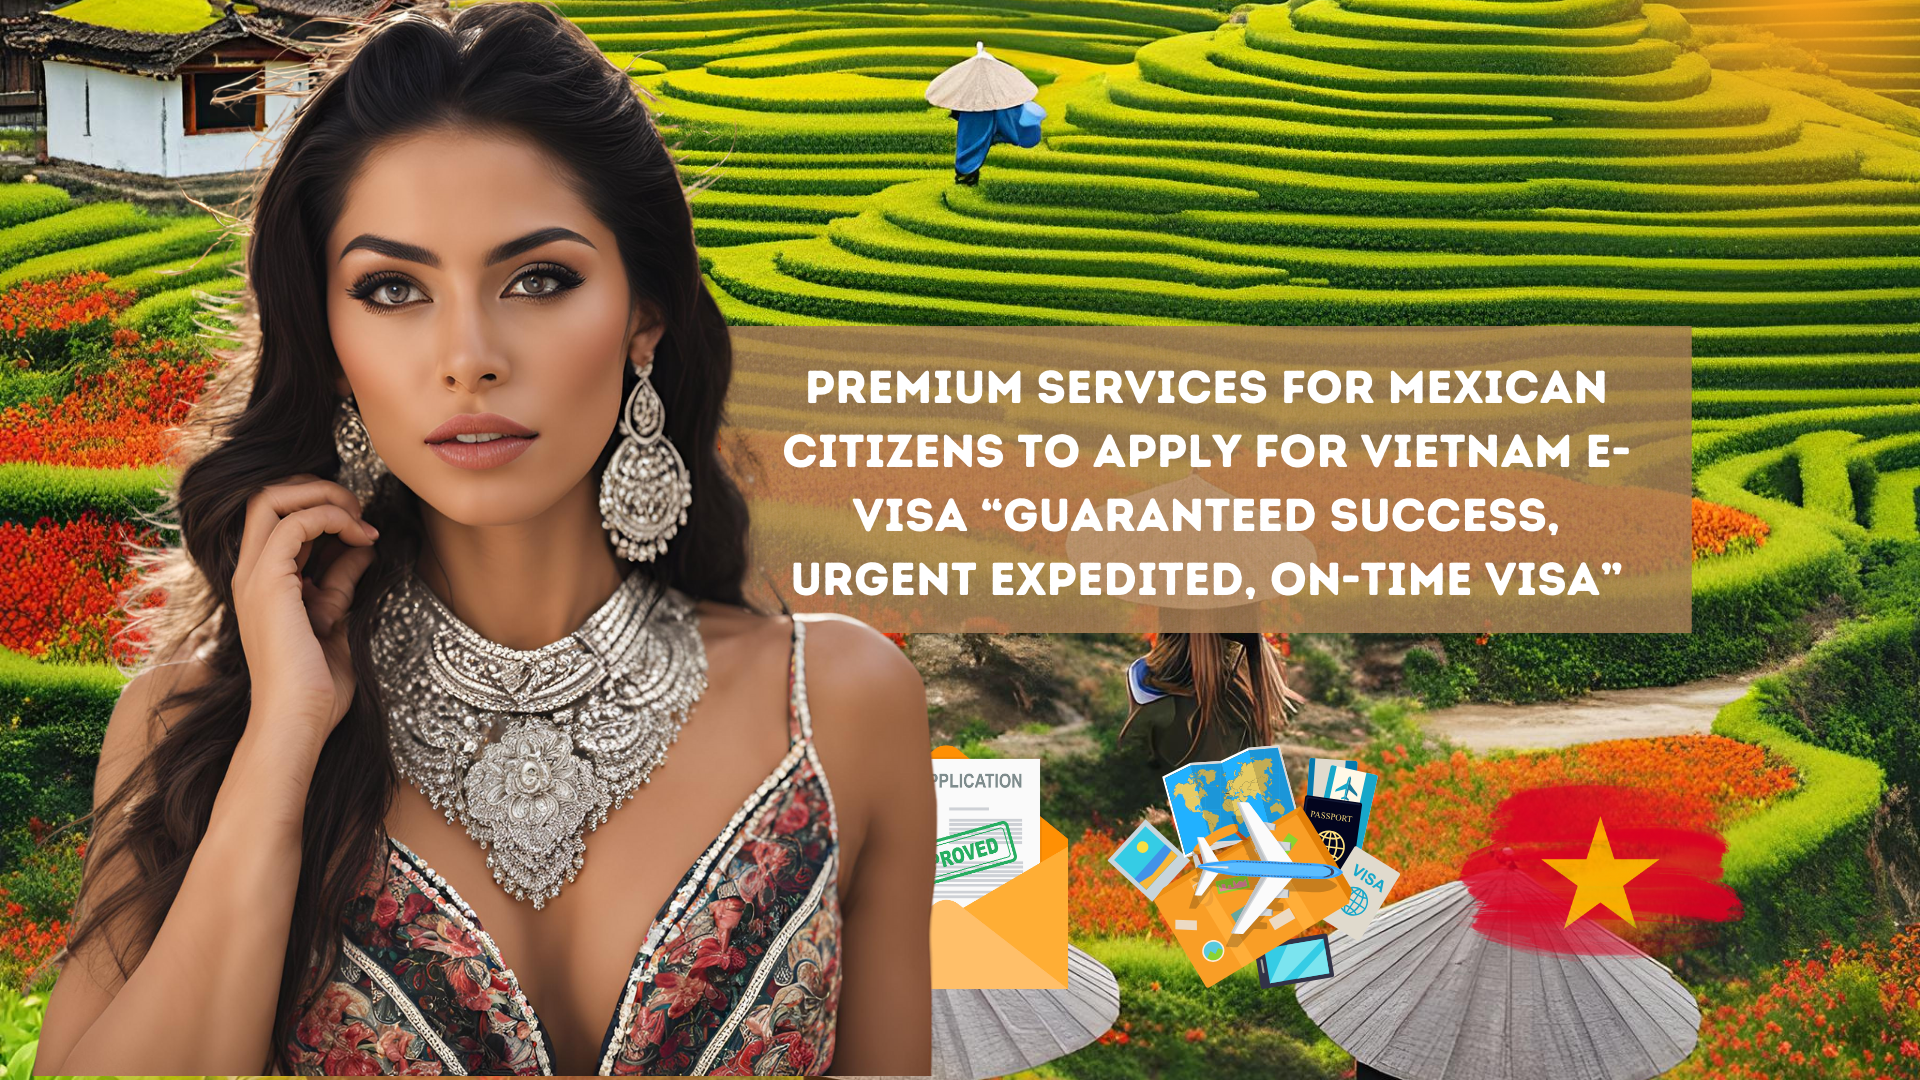 Premium Services for Mexican Citizens to apply for Vietnam e-visa “Guaranteed success, urgent expedited, on-time visa”